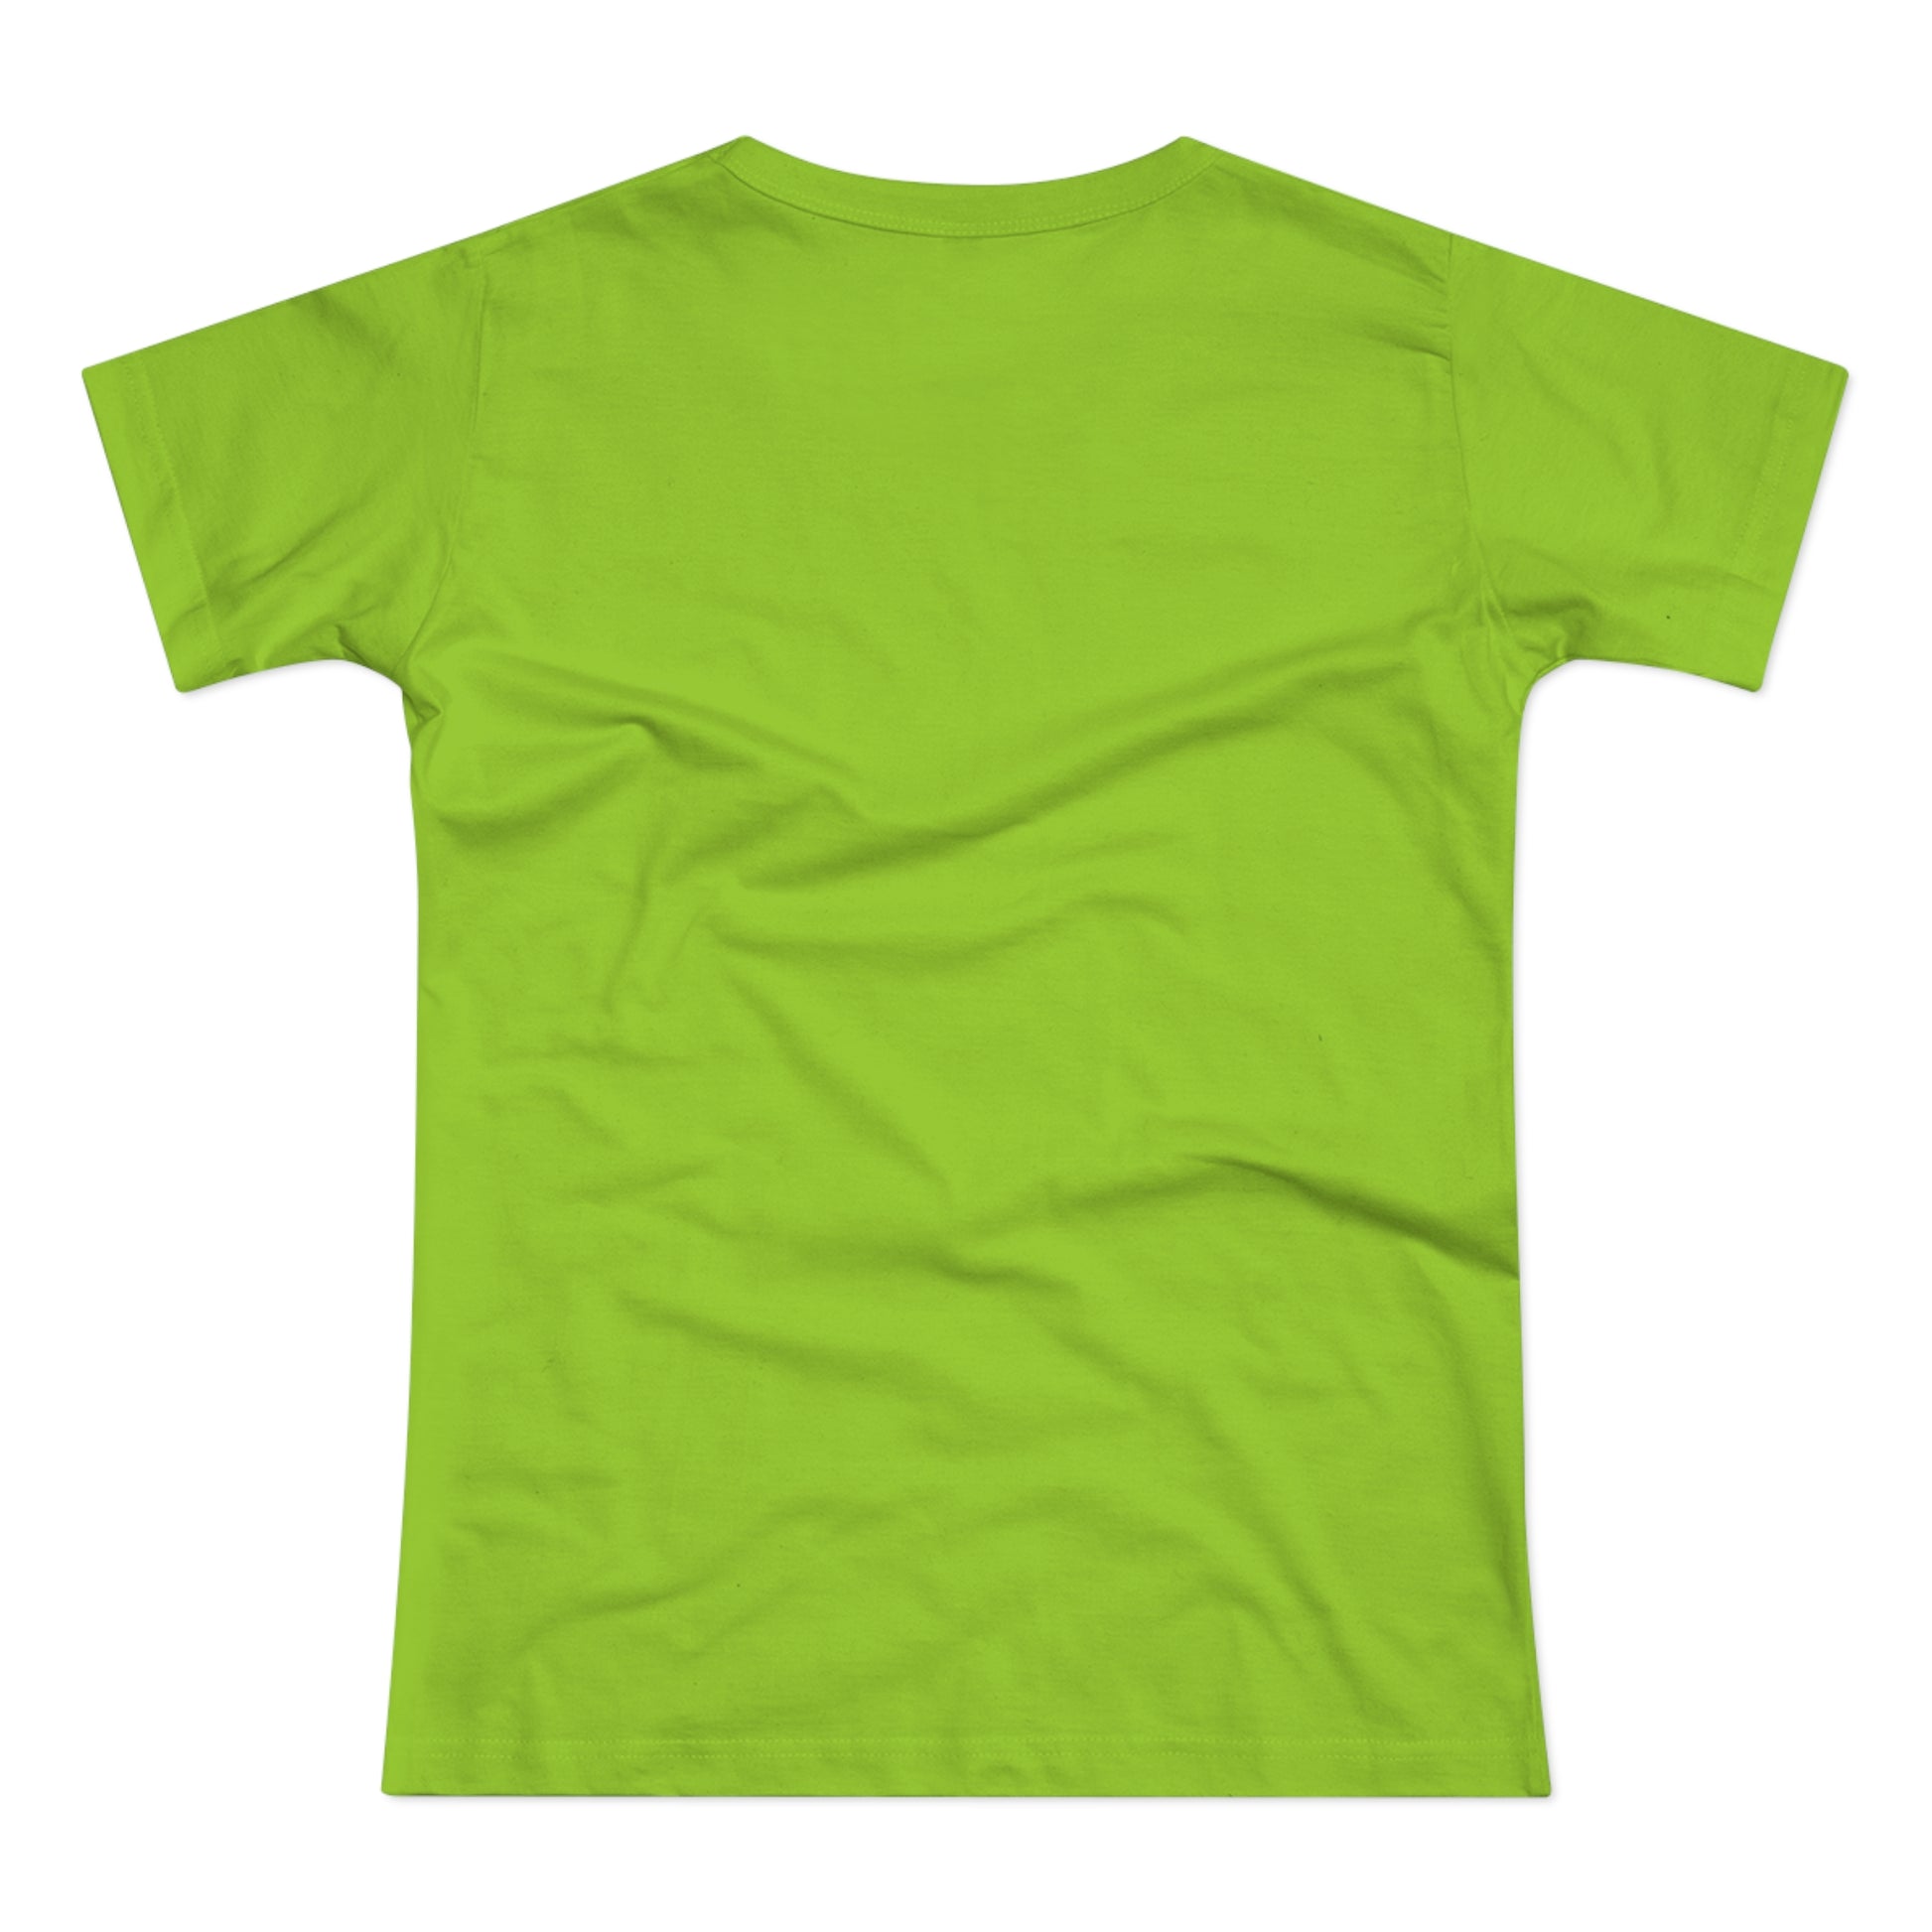 a lime green t - shirt on a white background